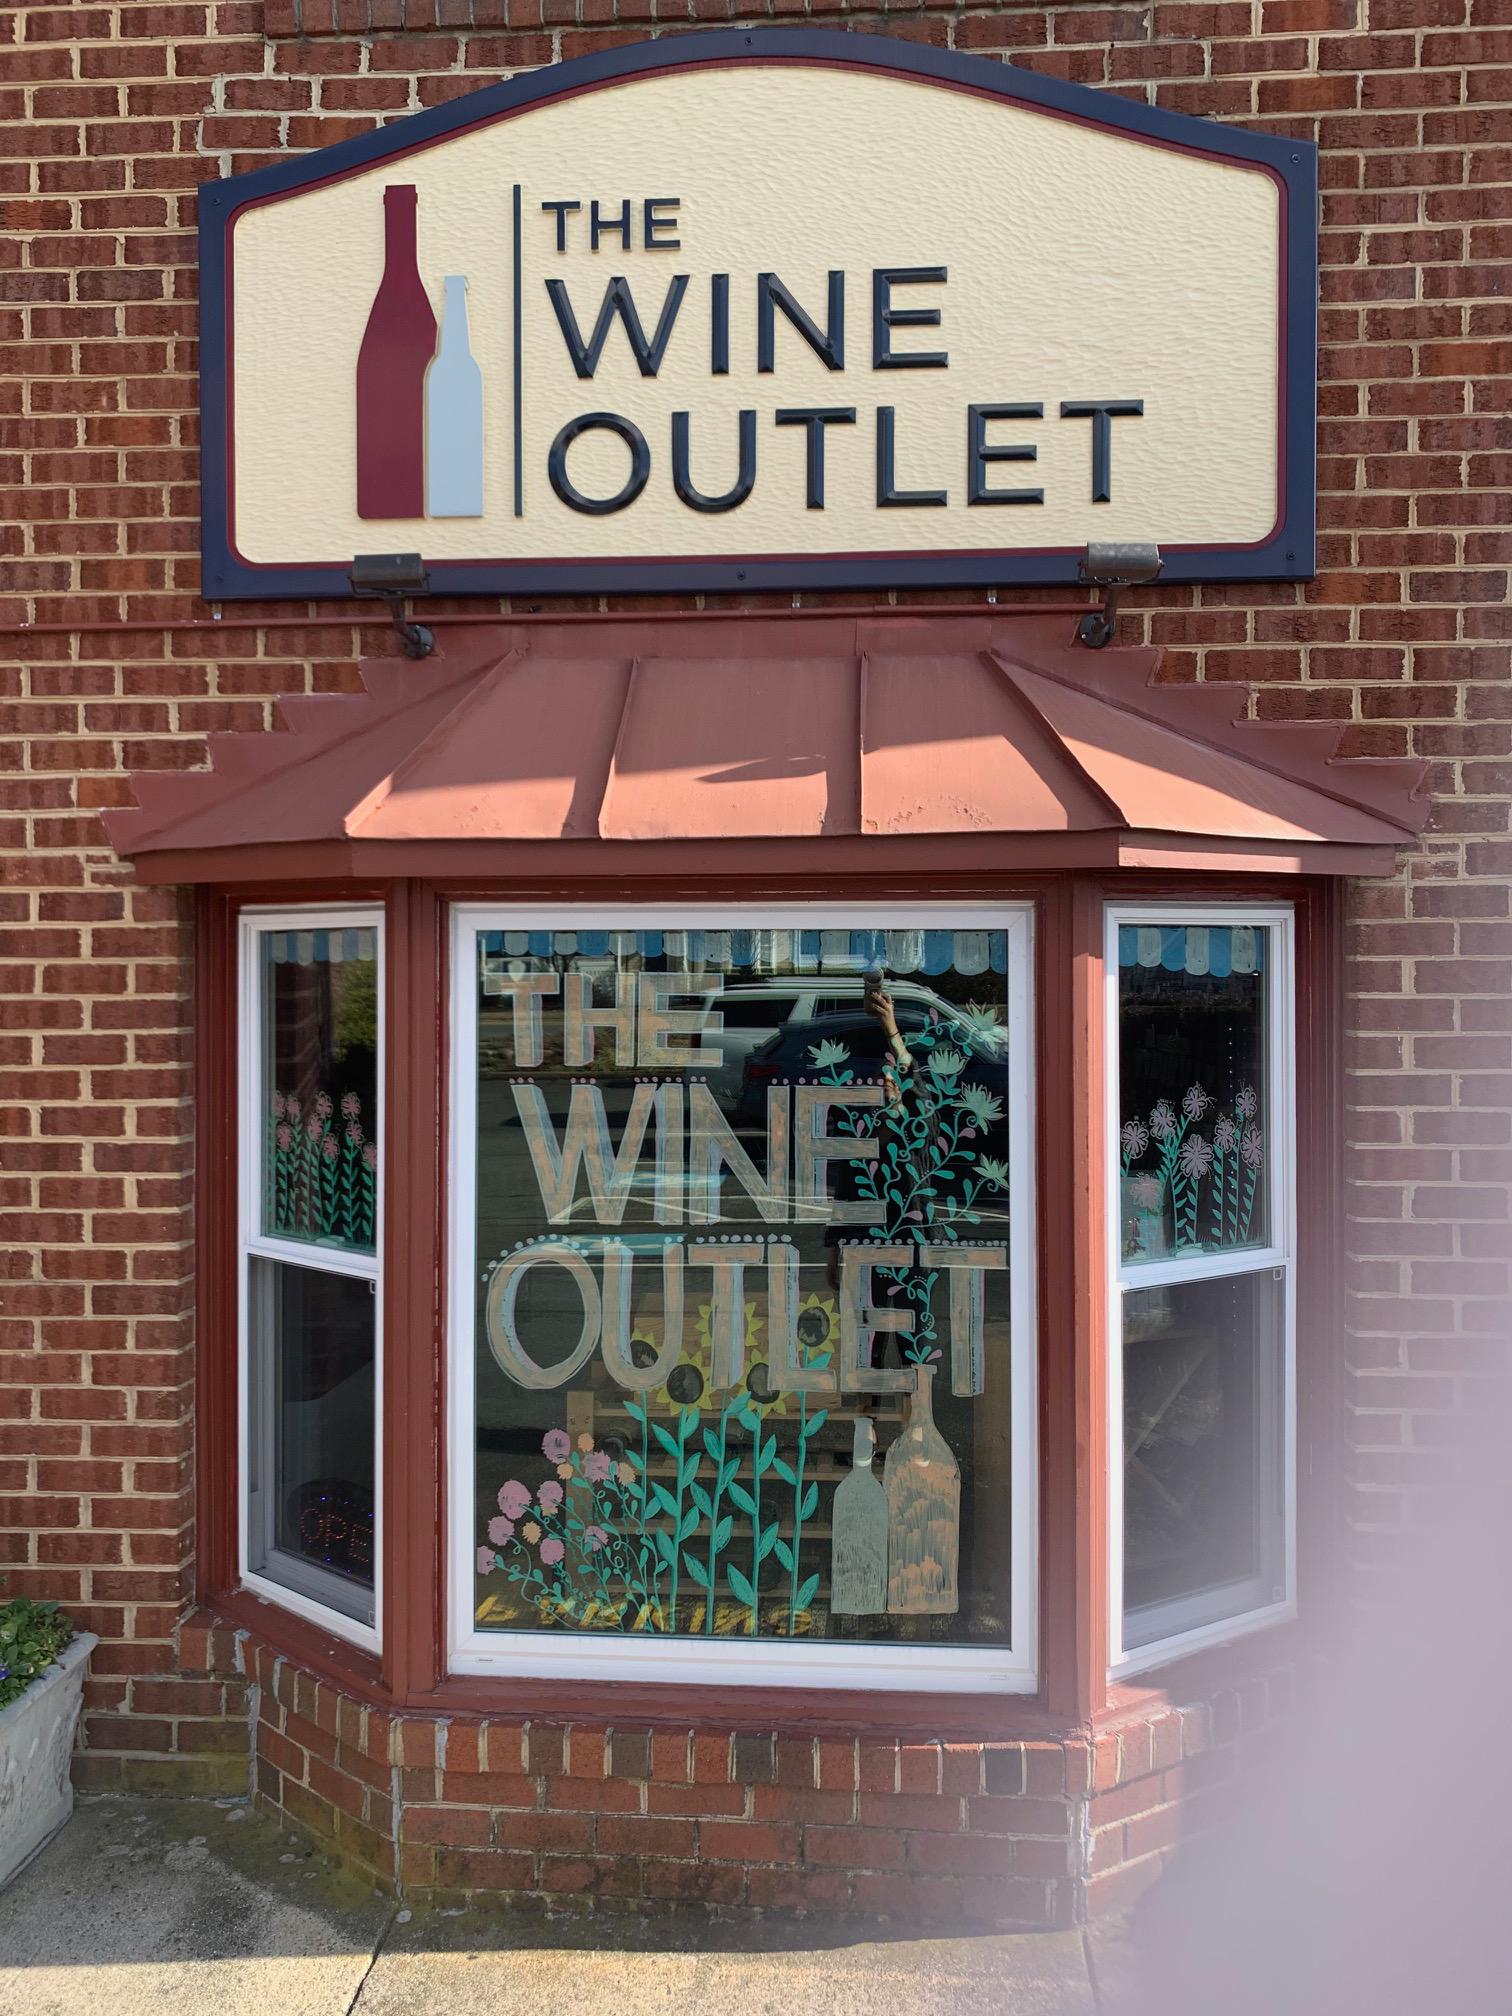 Great Falls Wine Outlet Photo